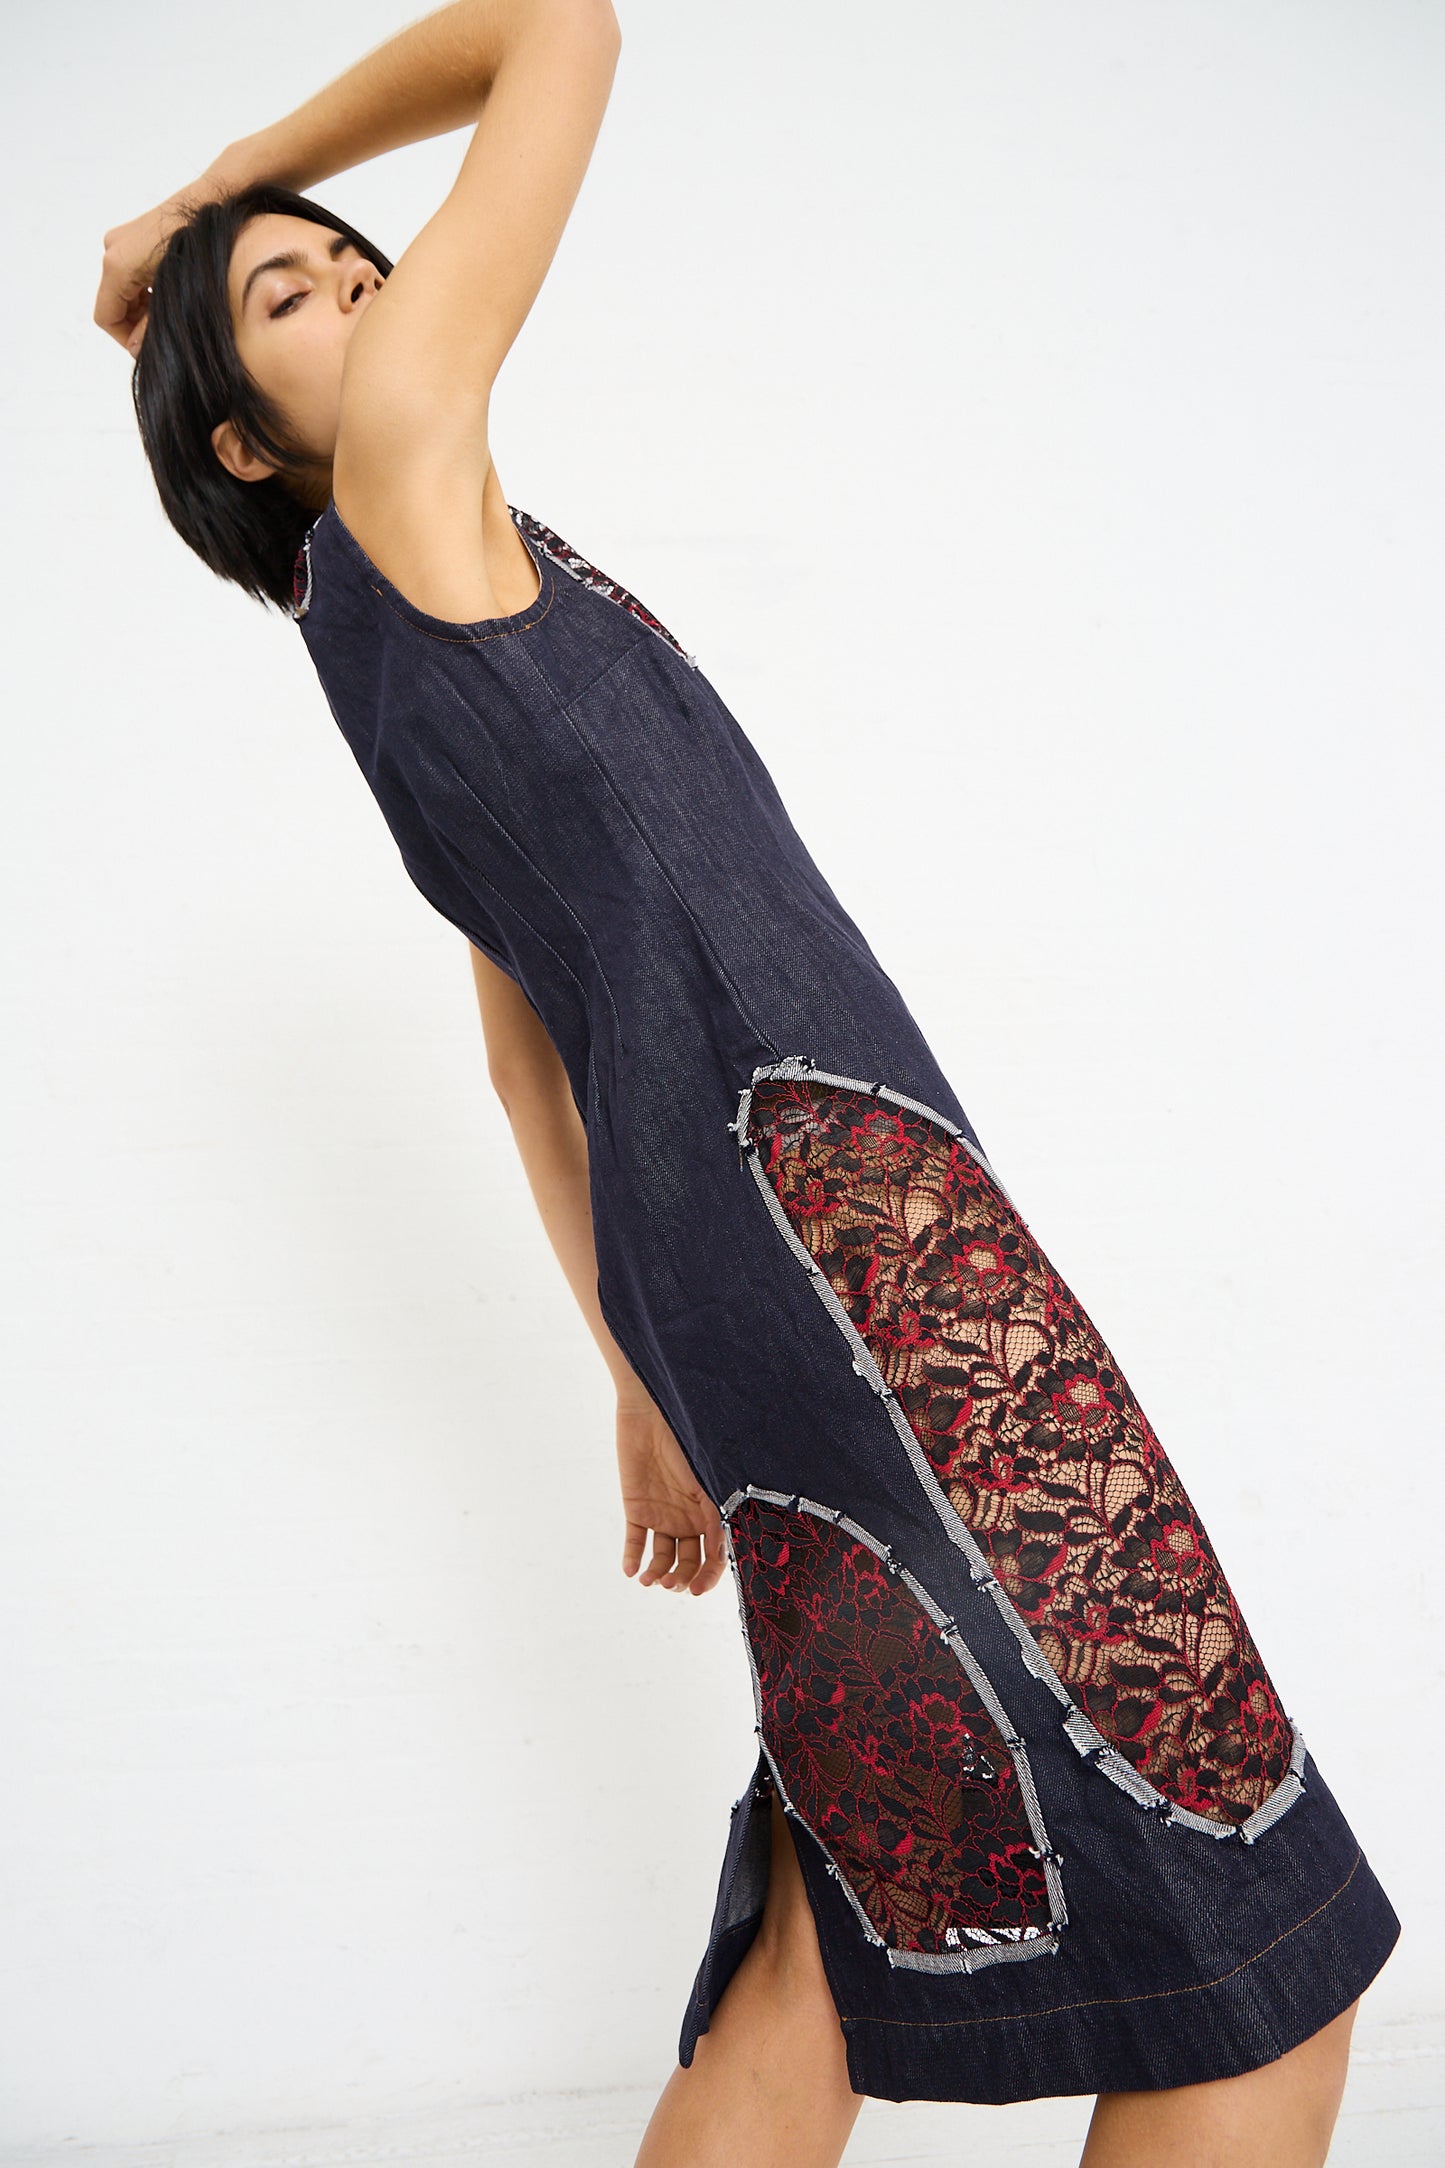 A woman posing in a sleeveless SC103 Denim Motto Dress in Weft with a red patterned inset and cutout lace detailing, against a white background.